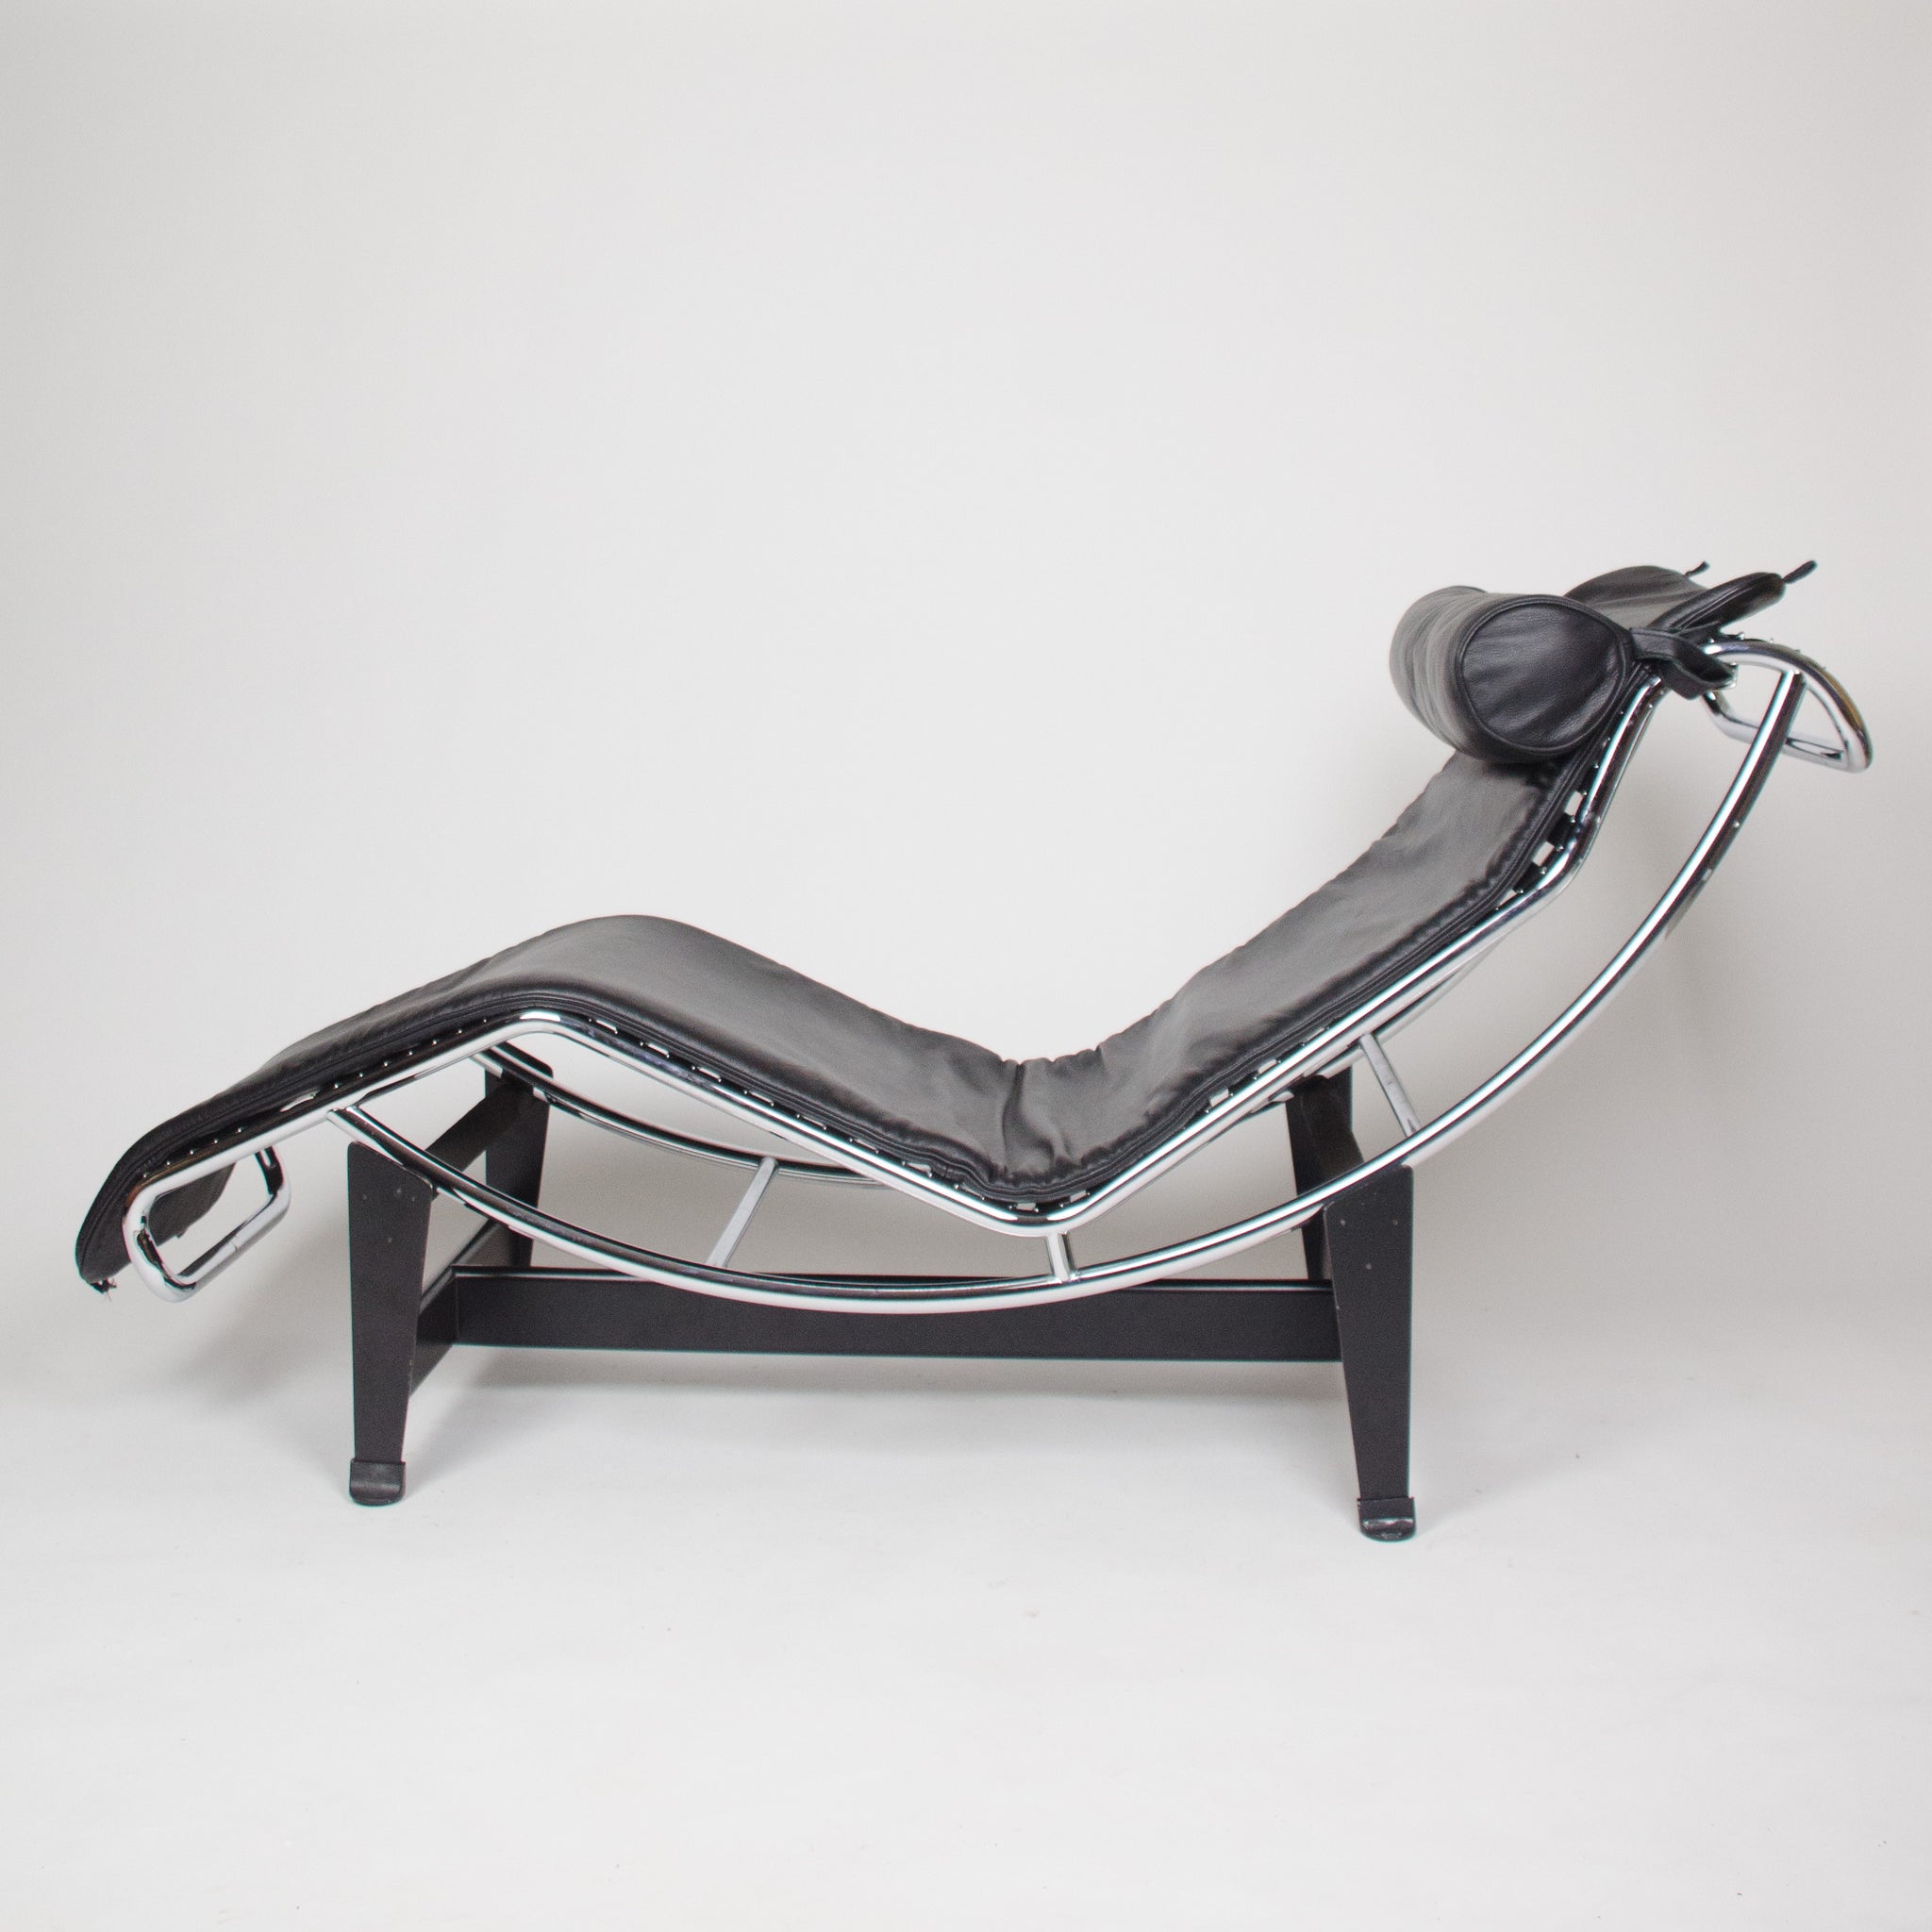 SOLD Cassina Le Corbusier LC4 Chaise Lounge Chair Black Leather